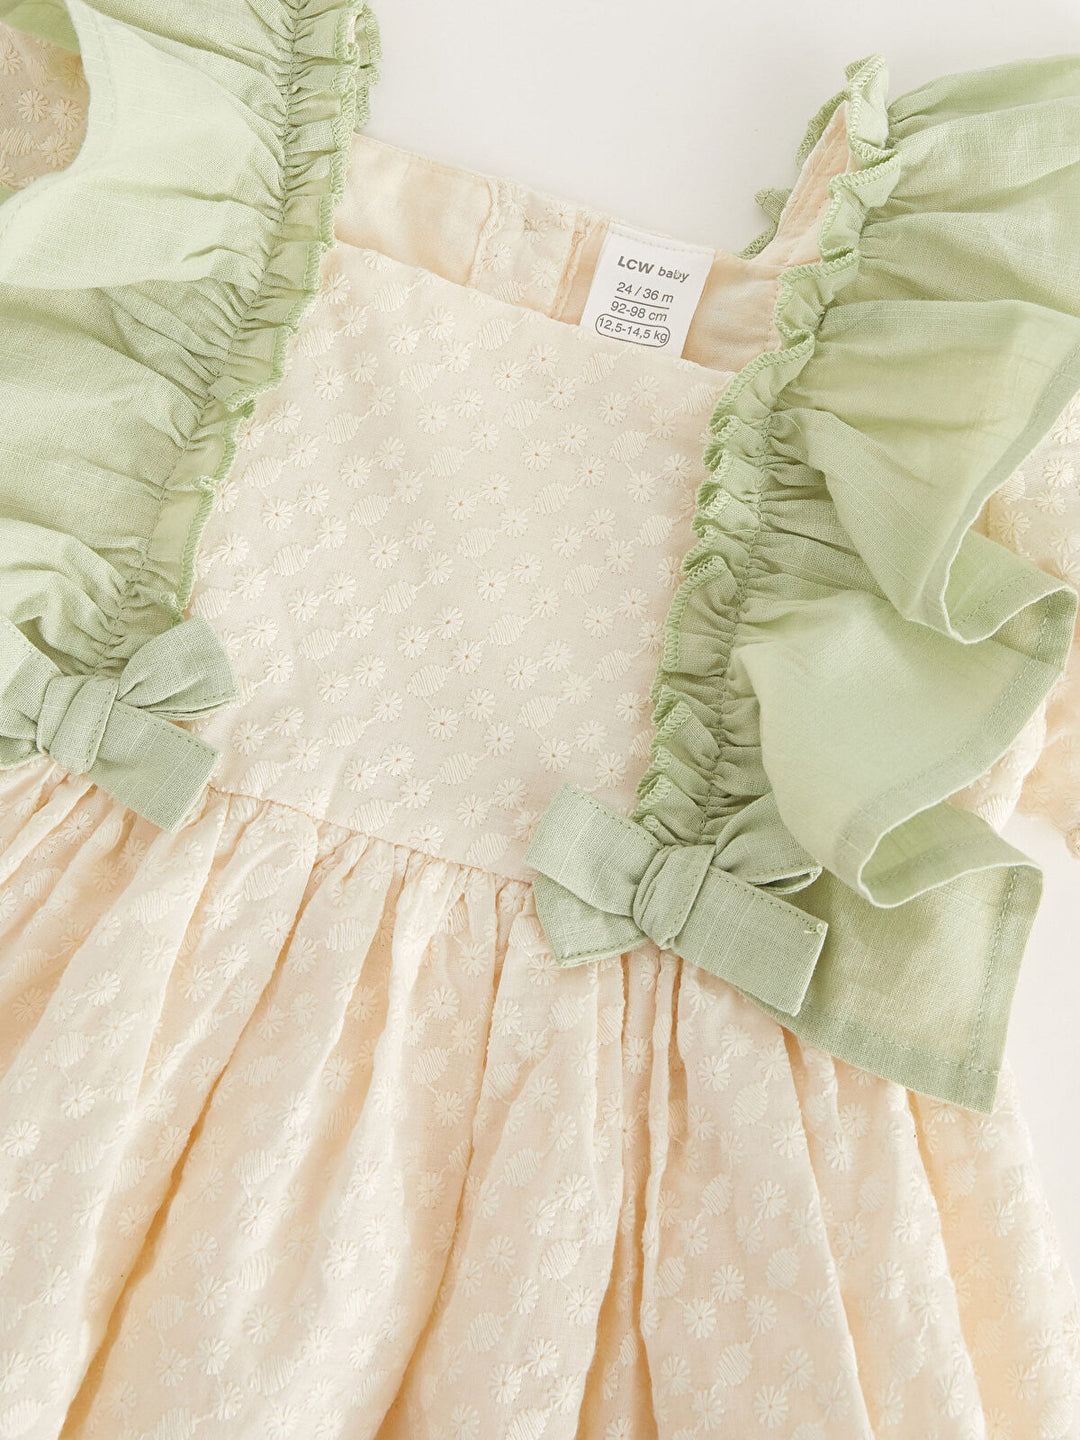 Ecru Square Collar Short Sleeve Embroidery Detailed Baby Girl Dress